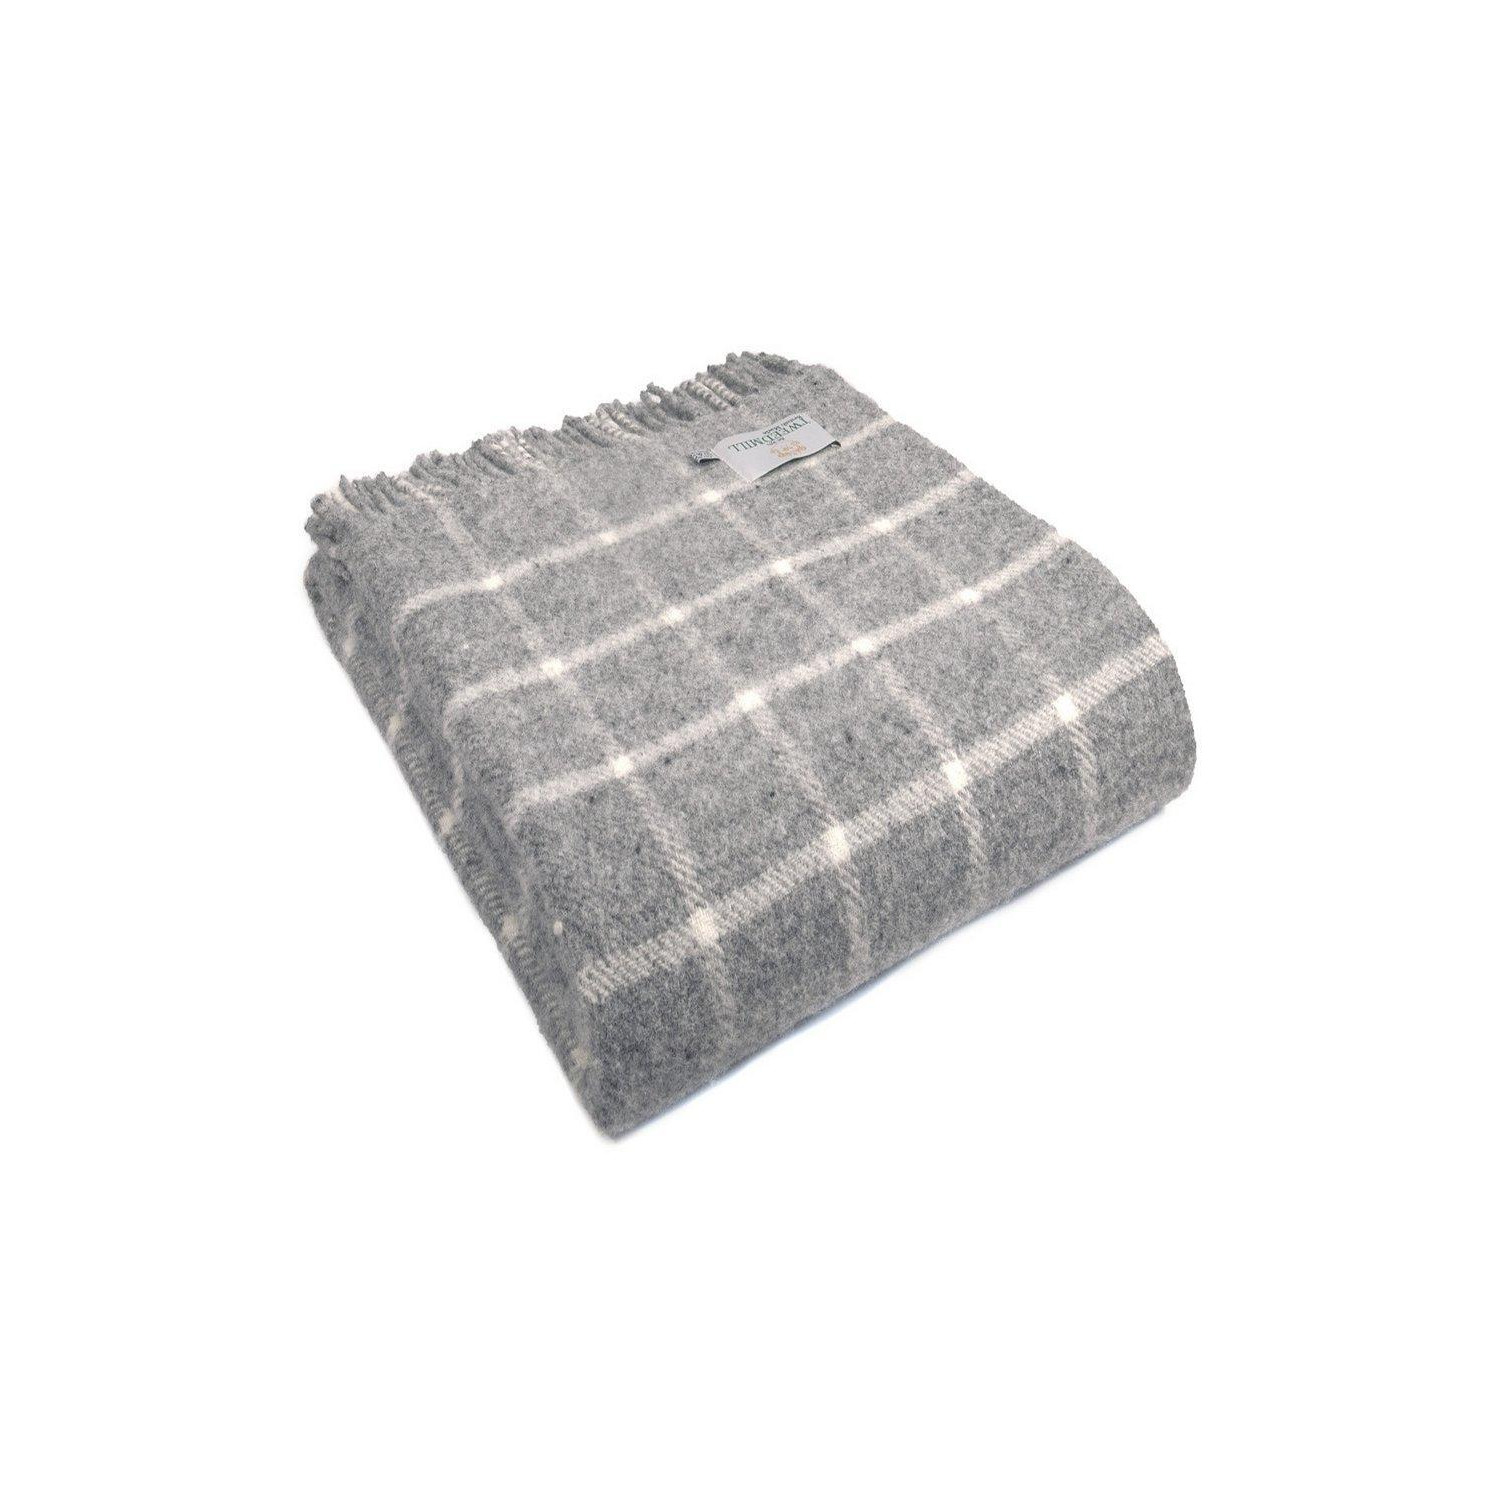 100% Pure New Wool Chequered Check Throw Blanket Made in Wales - image 1